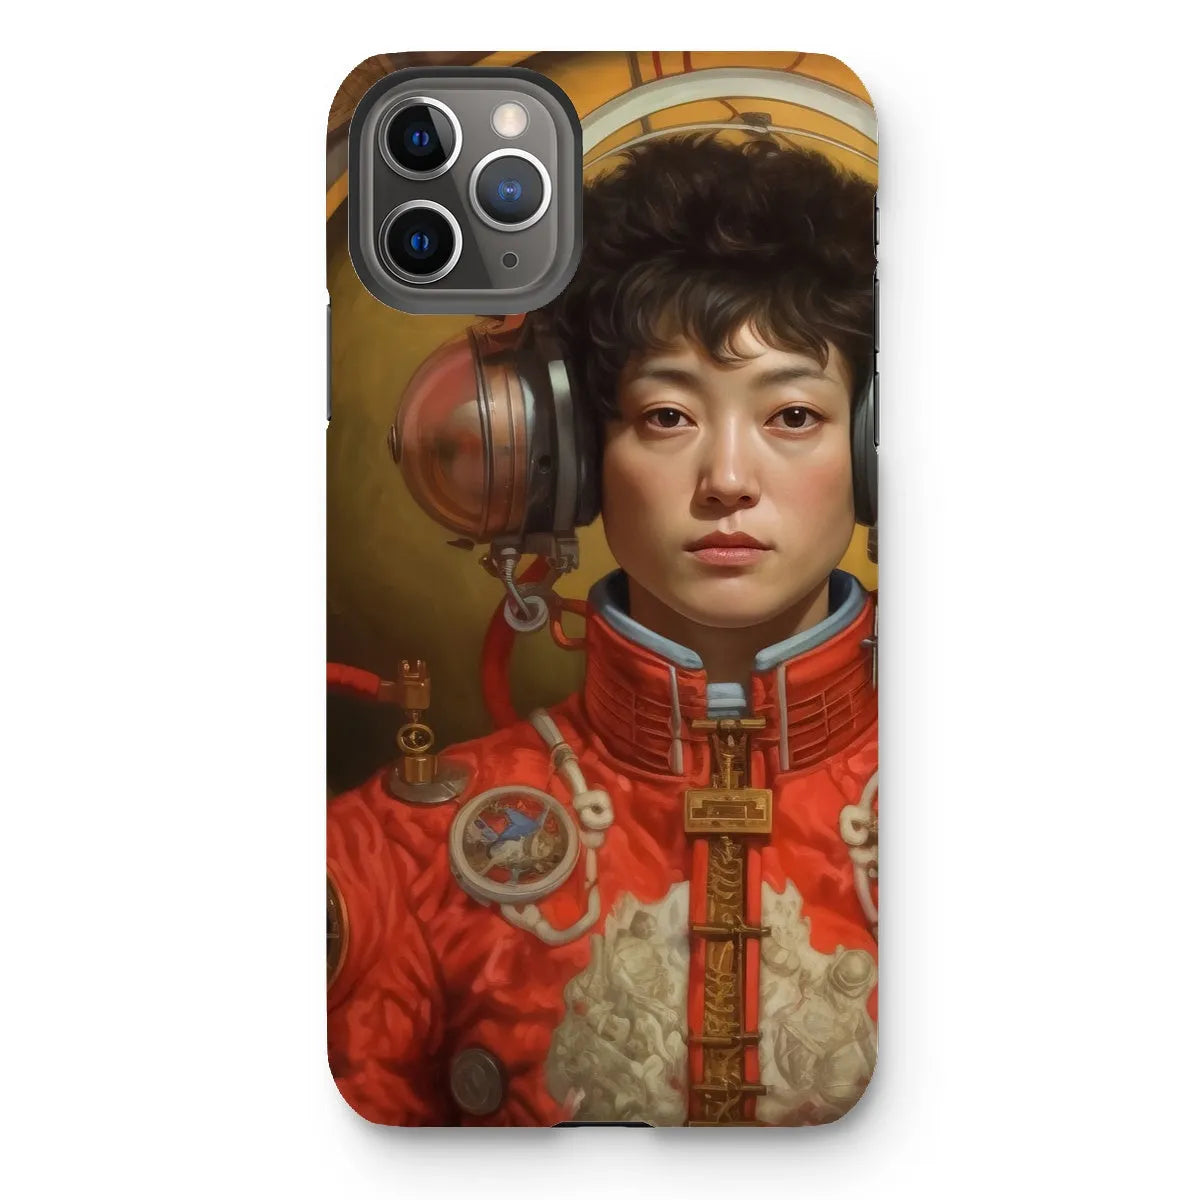 Mùchén - Gay Chinese Astronaut Aesthetic Phone Case - Iphone 11 Pro Max / Matte - Mobile Phone Cases - Aesthetic Art